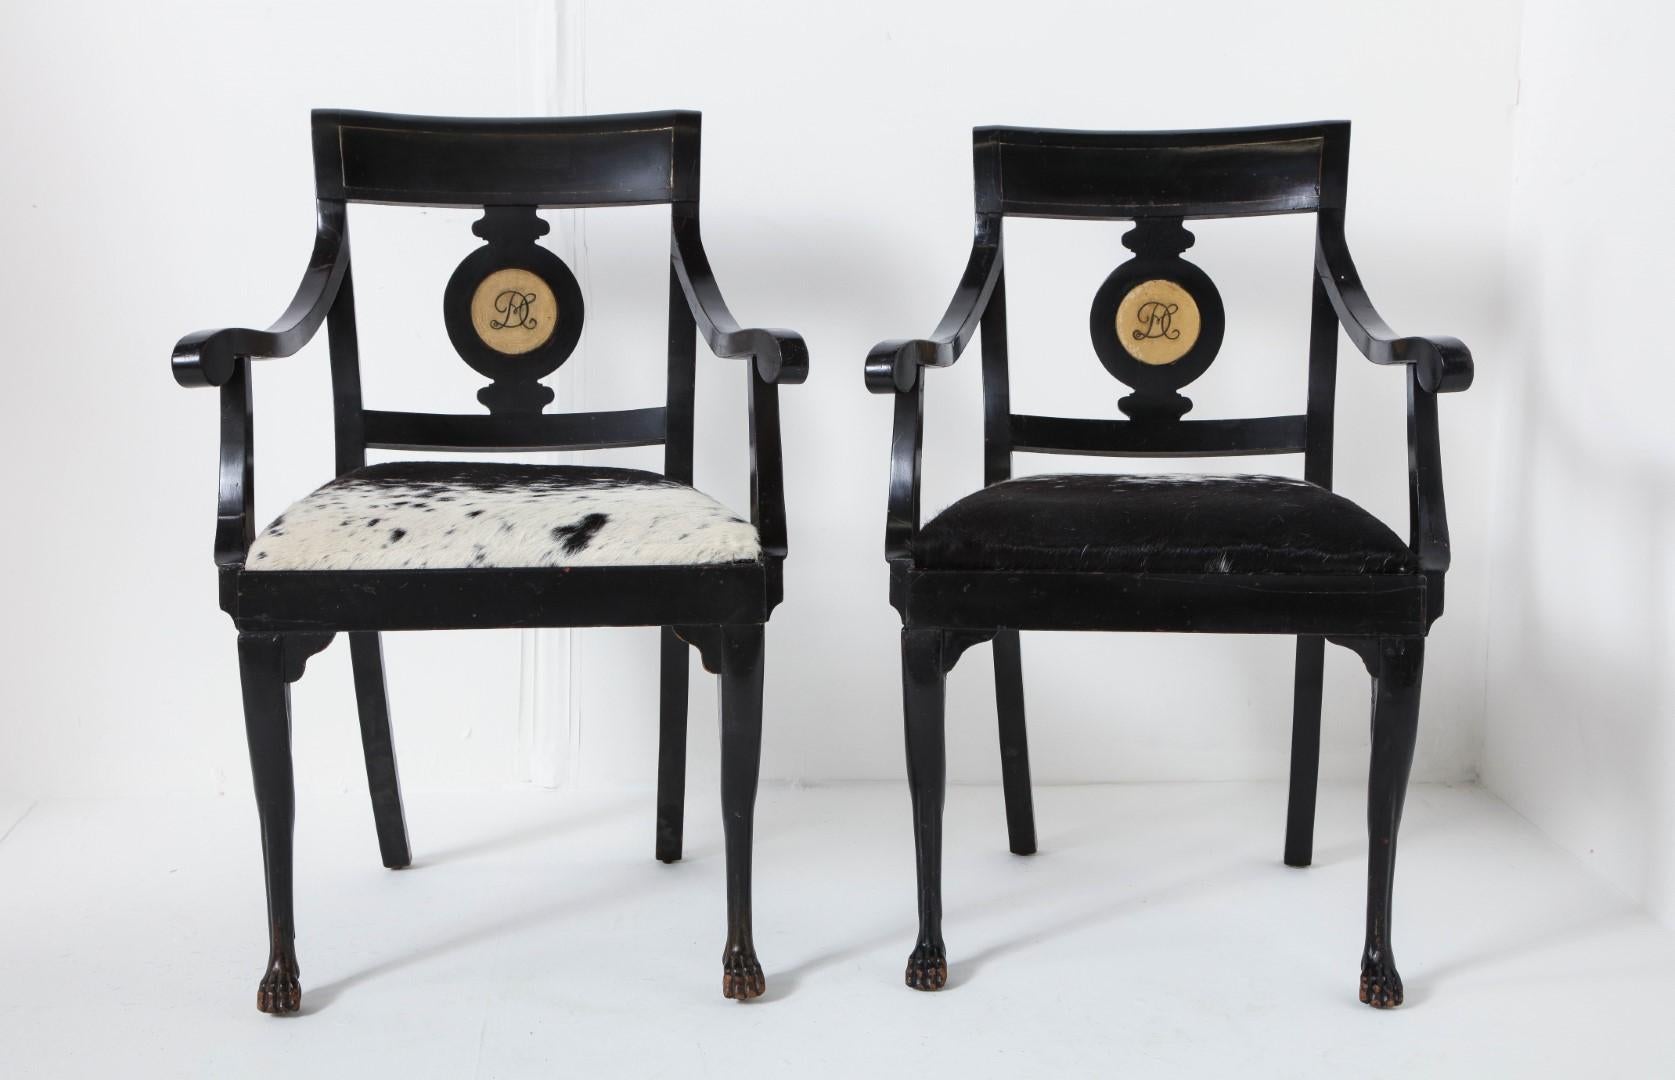 Pair of Ebonized English Regency Armchairs with Pony Seats and Monogram In Good Condition For Sale In Chicago, IL